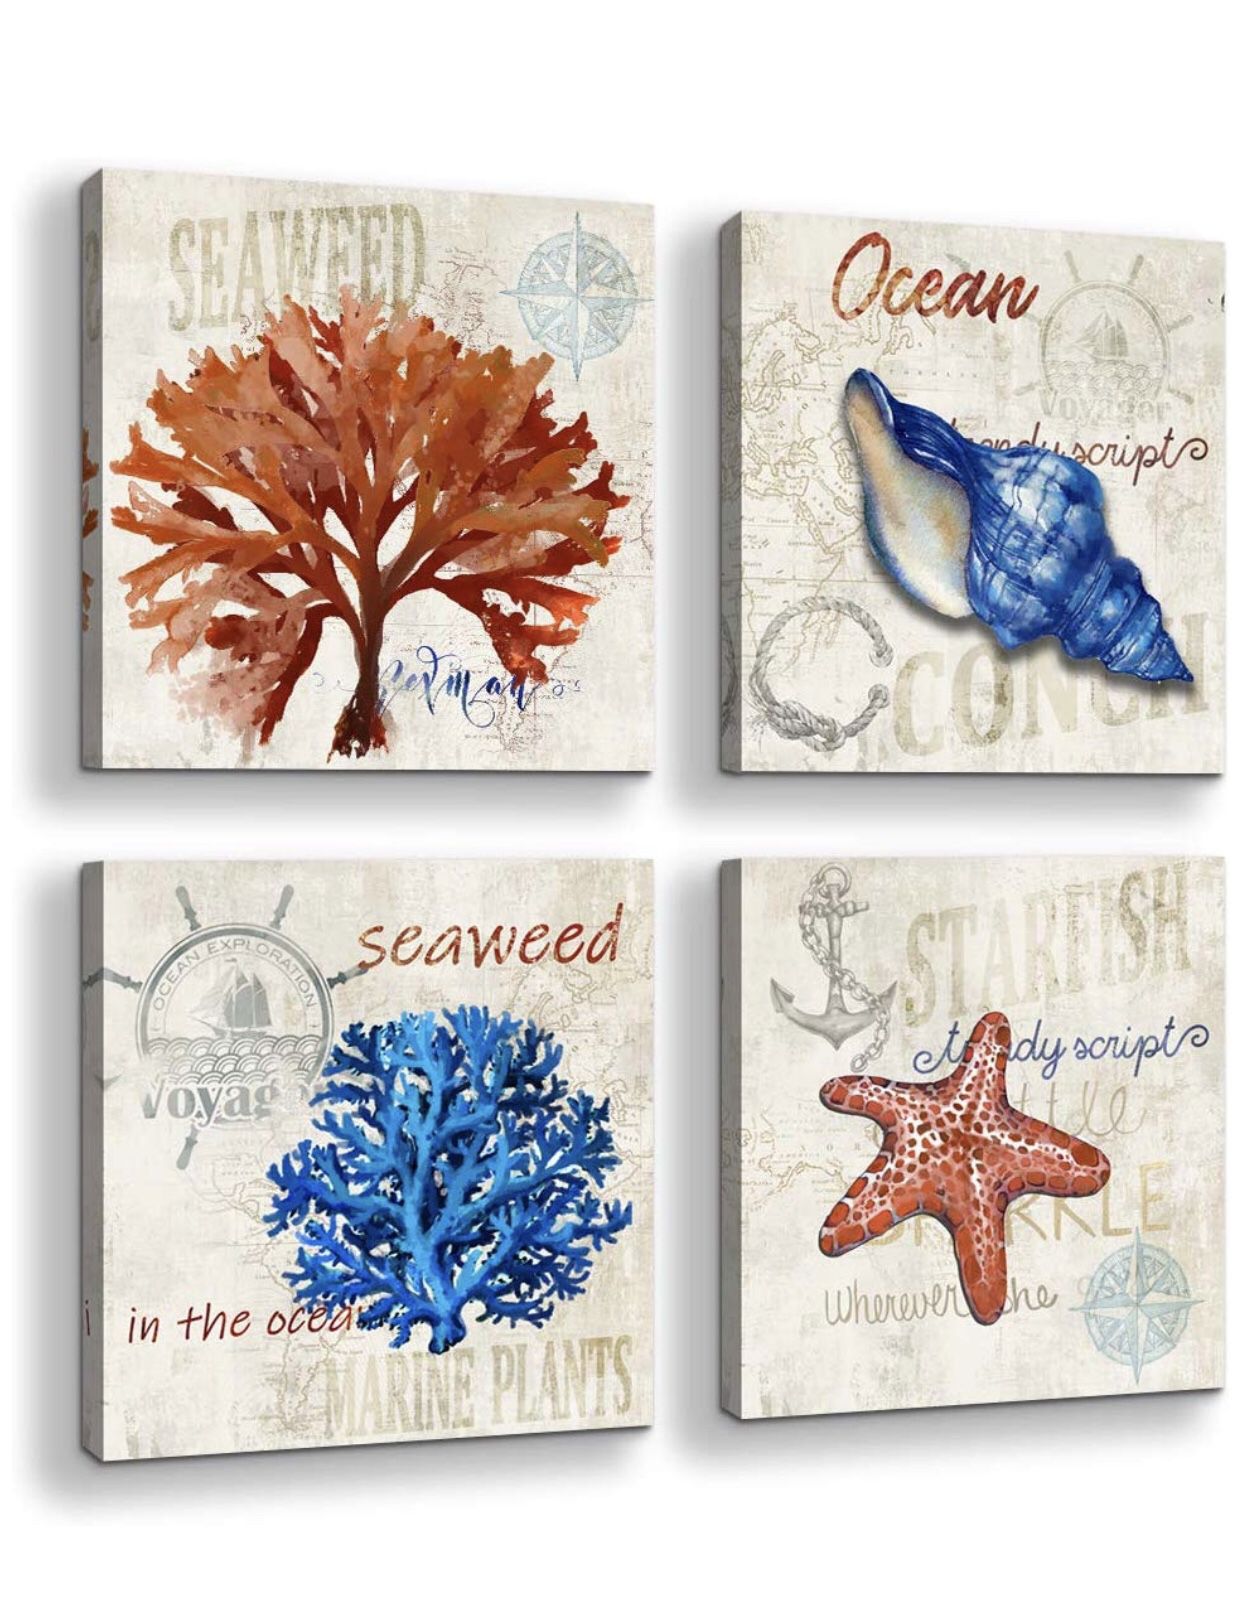 Mofutinpo 5.0 out of 5 stars 3 Reviews Bathroom Decor Ocean Canvas Wall Art Beach Themed Reddish Brown Navy Starfish Conch Seaweed Print Picture Ar